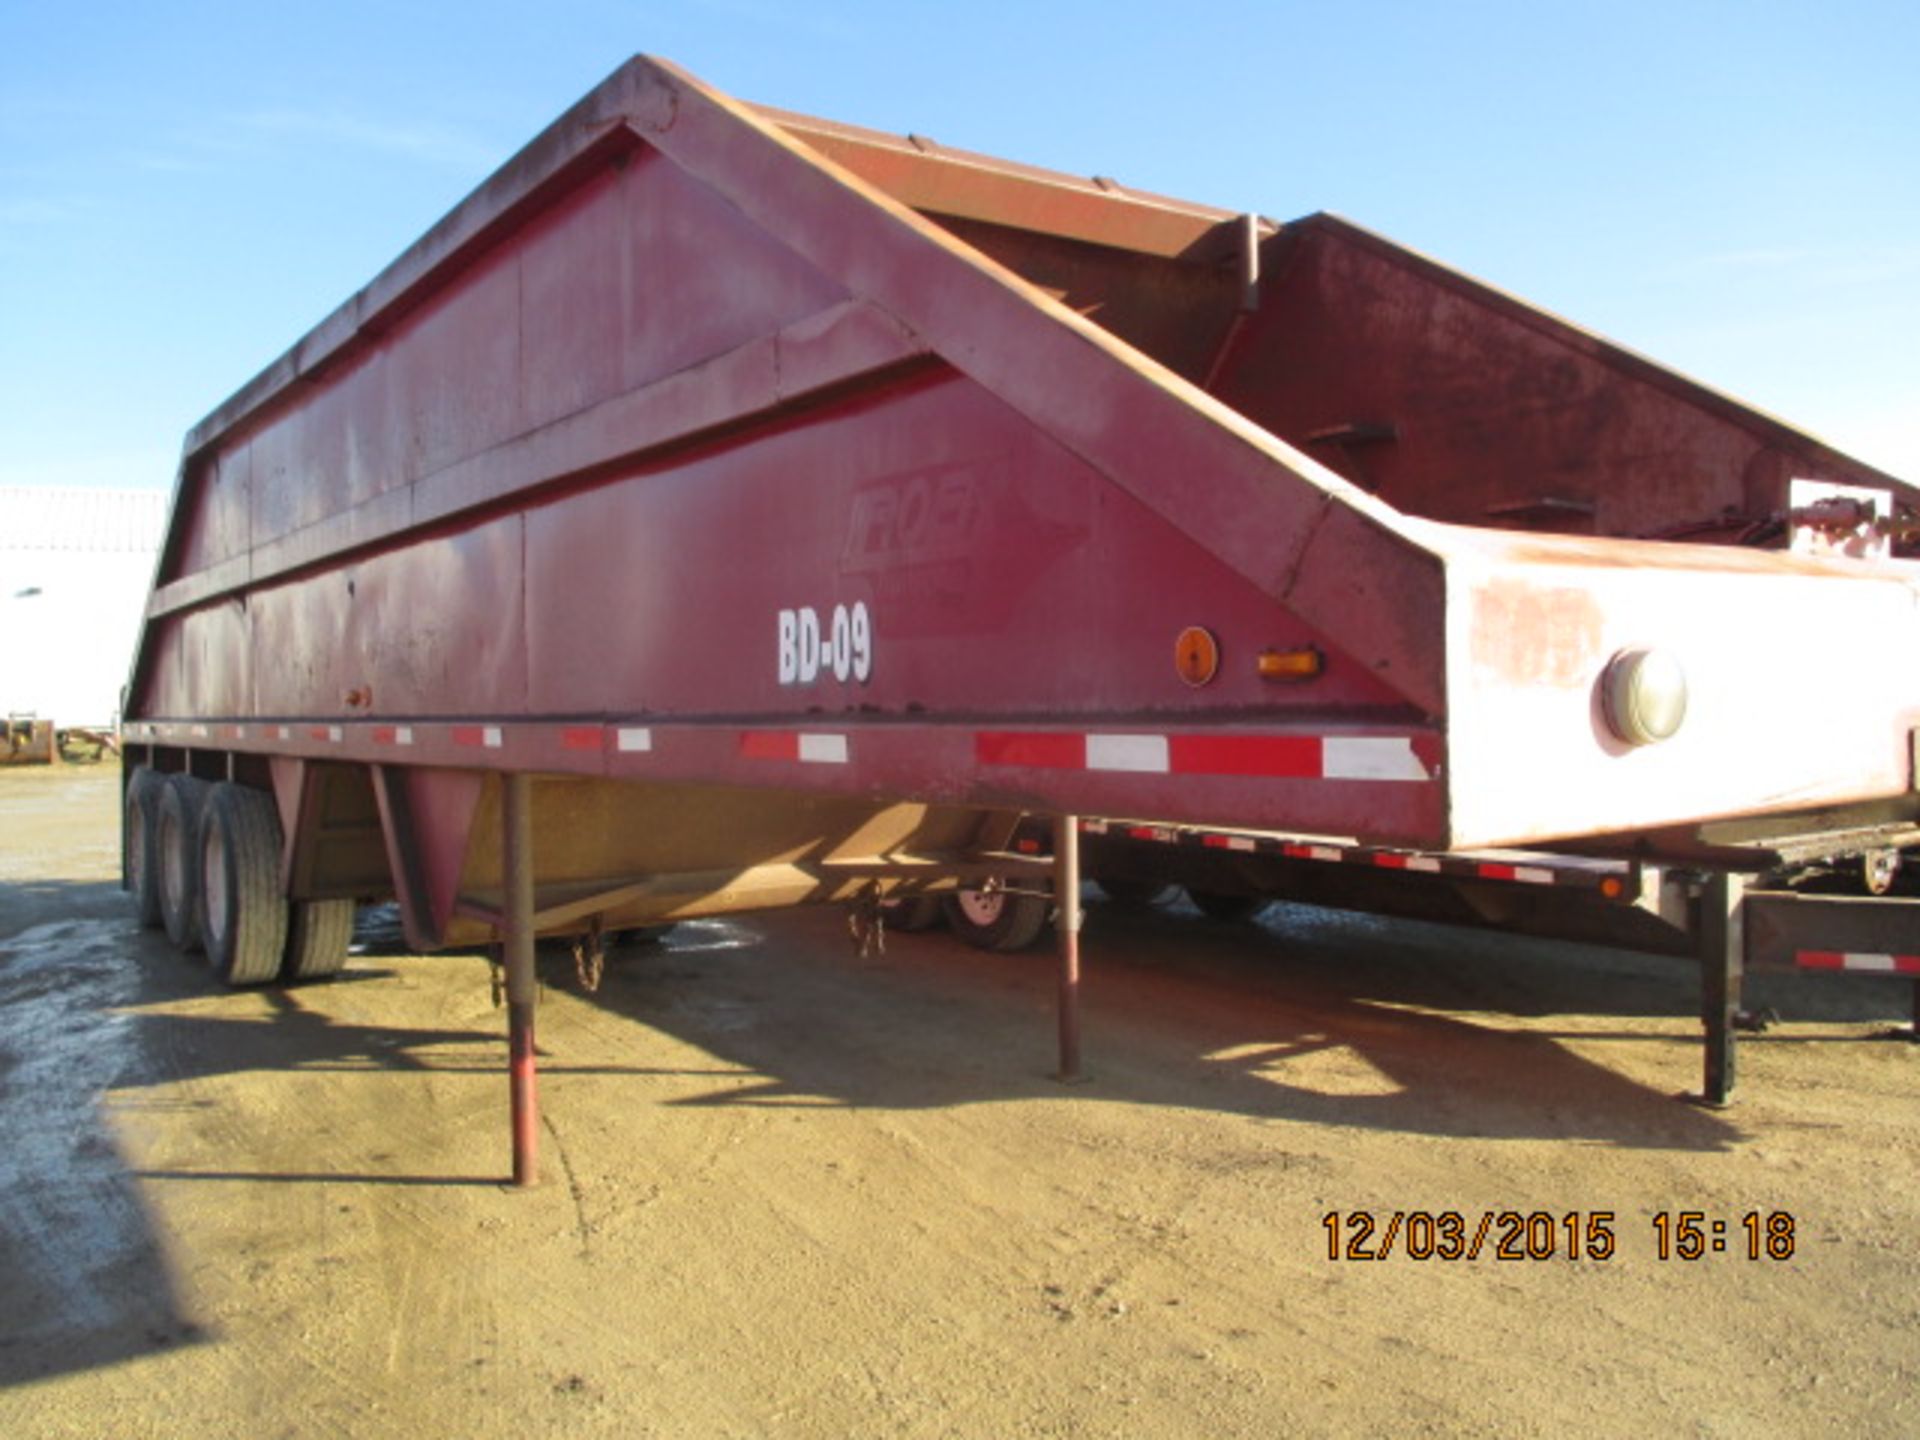 TITLE-Homemade tri-axle belly dump, missing VIN plate, unit BD-09 - Image 2 of 5